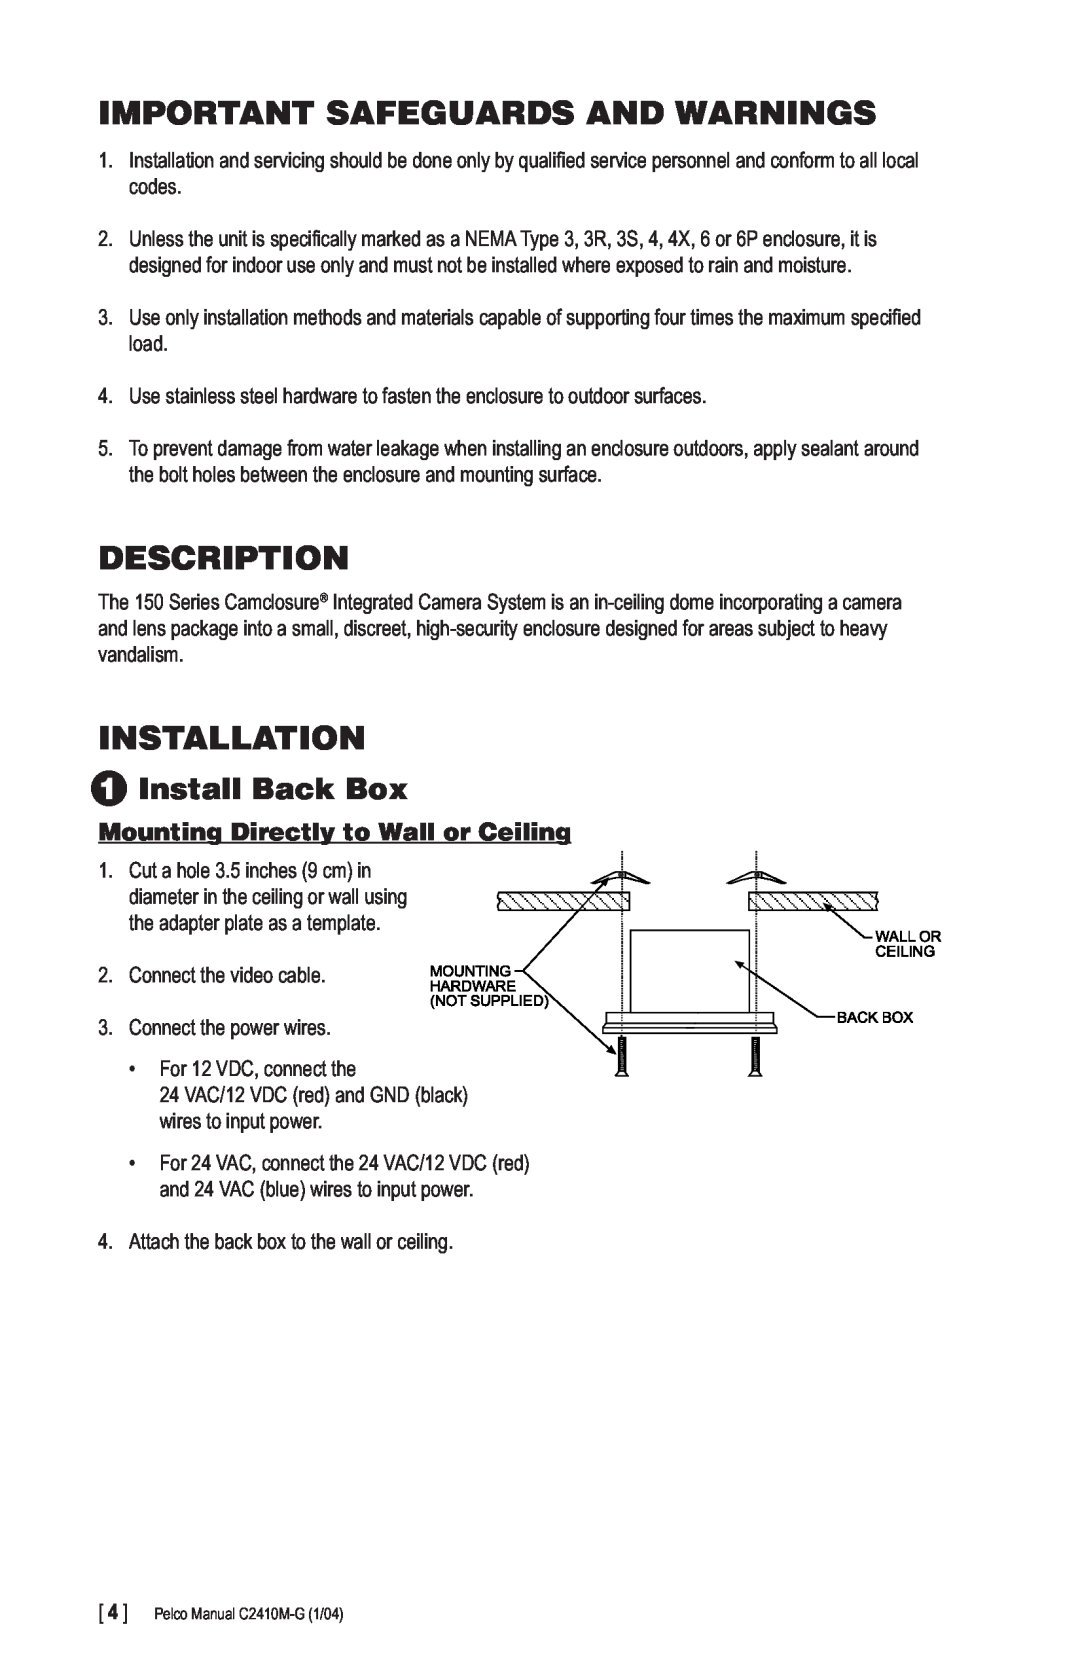 Pelco C2410M-G manual Important Safeguards And Warnings, Description, Installation, 1Install Back Box 